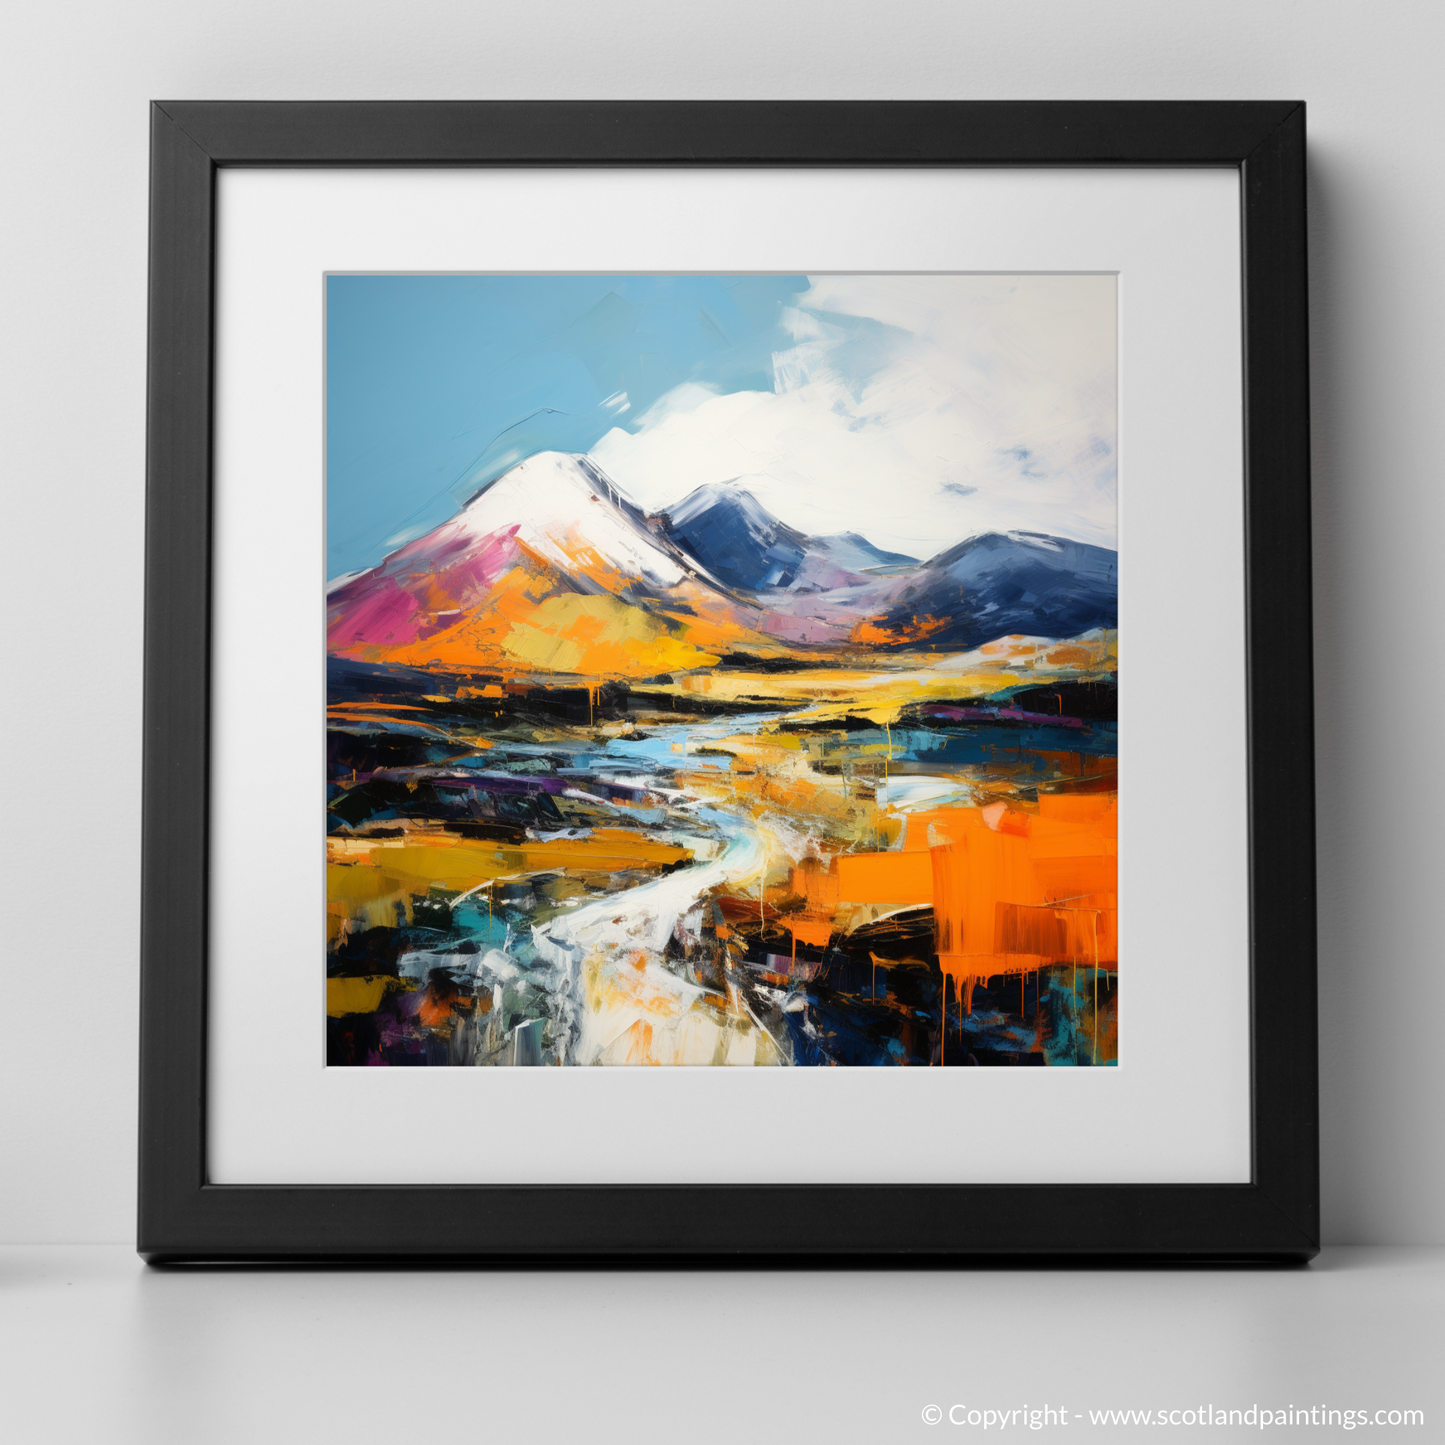 Painting and Art Print of Meall Corranaich. Meall Corranaich Unleashed: An Expressionist Ode to Scottish Munros.